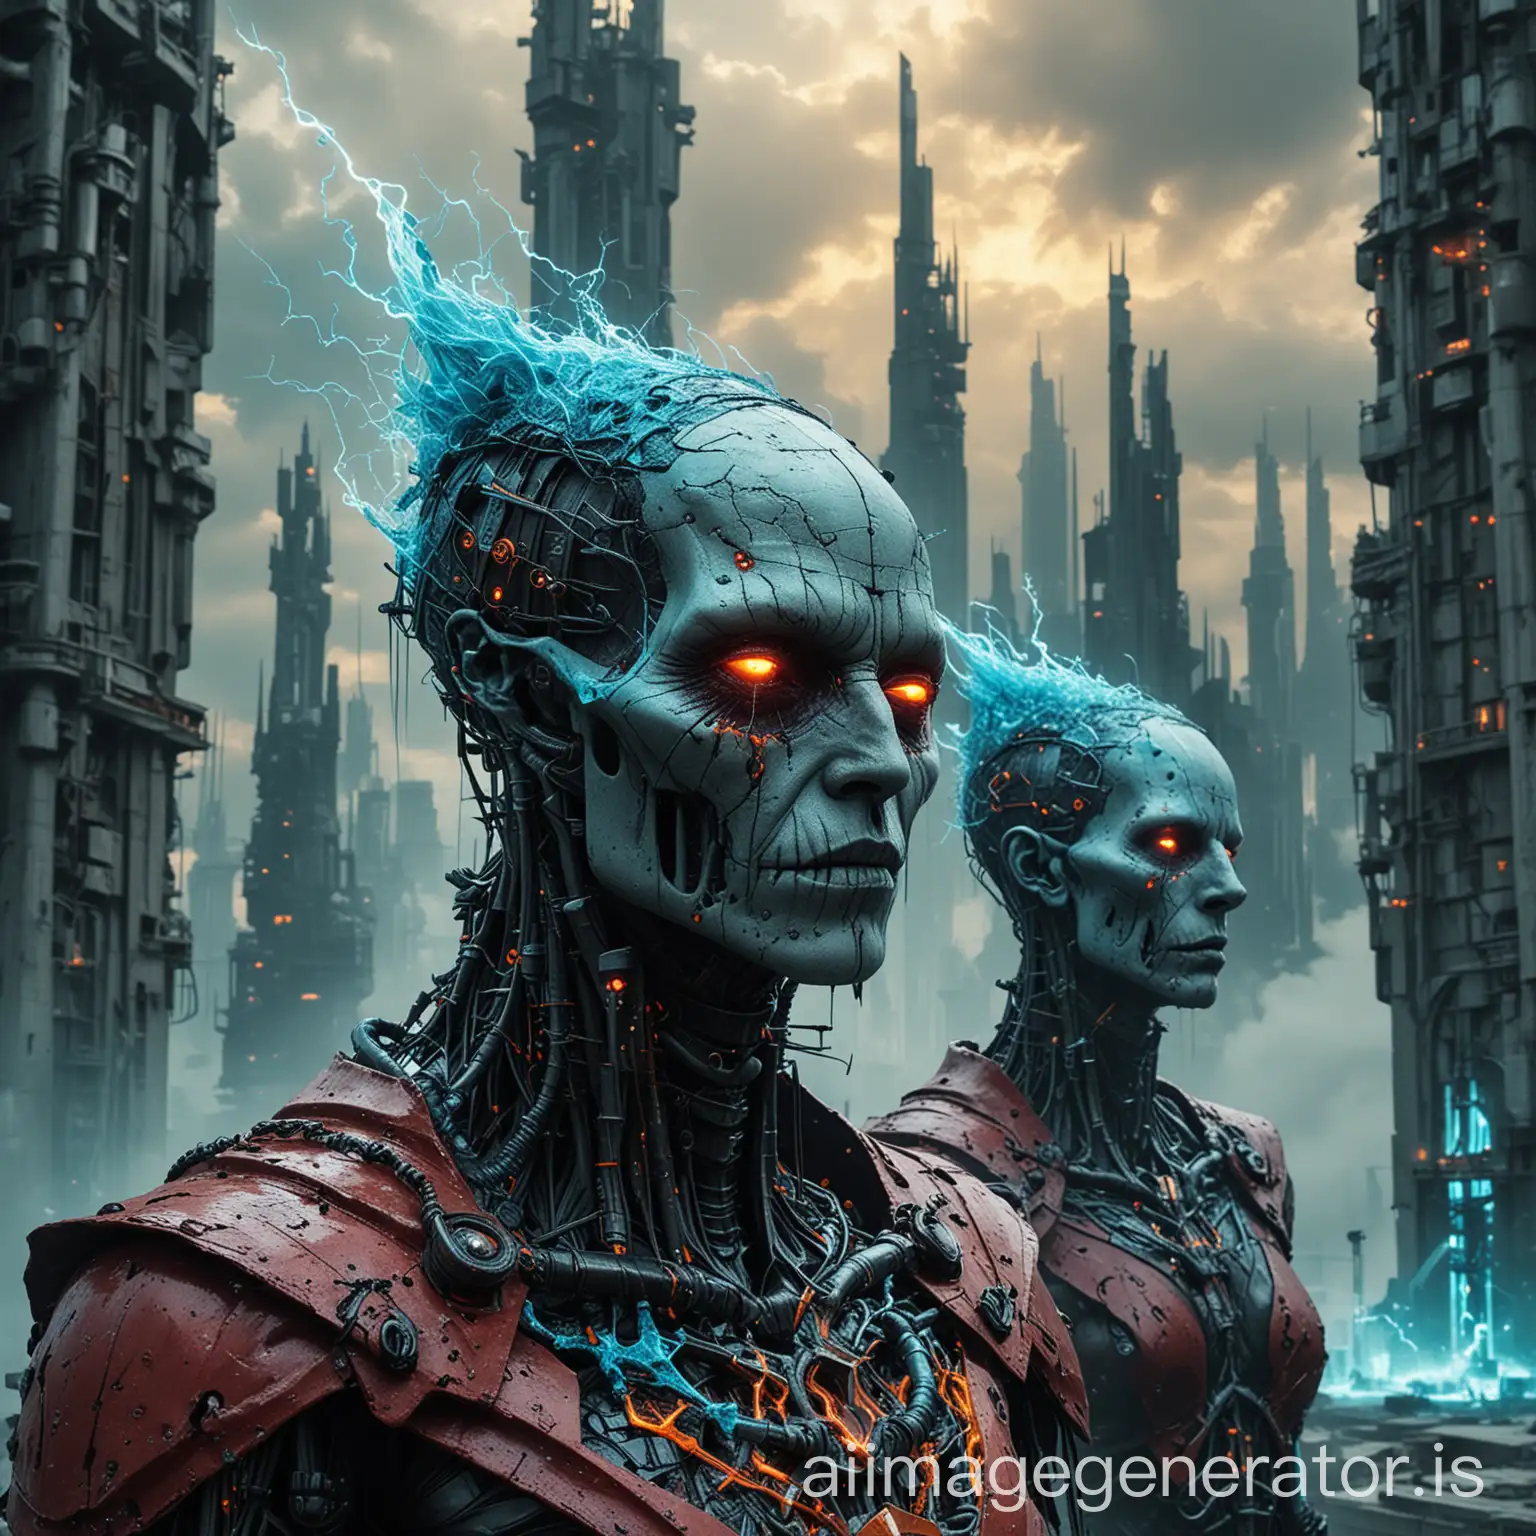 A surreal and highly detailed image featuring  super macro close-up necromancer,with distinct facial features shaped like trapezoids. One necromancer emits aqua-themed energy bolts, while the other emits neon-blue energy bolts. They stand in front of a futuristic cityscape, complete with towering concrete buildings and distillation petrochemical columns, with a palette dominated by red and acid yellow hues. The atmosphere is enhanced by a photo filter that displays black clouds